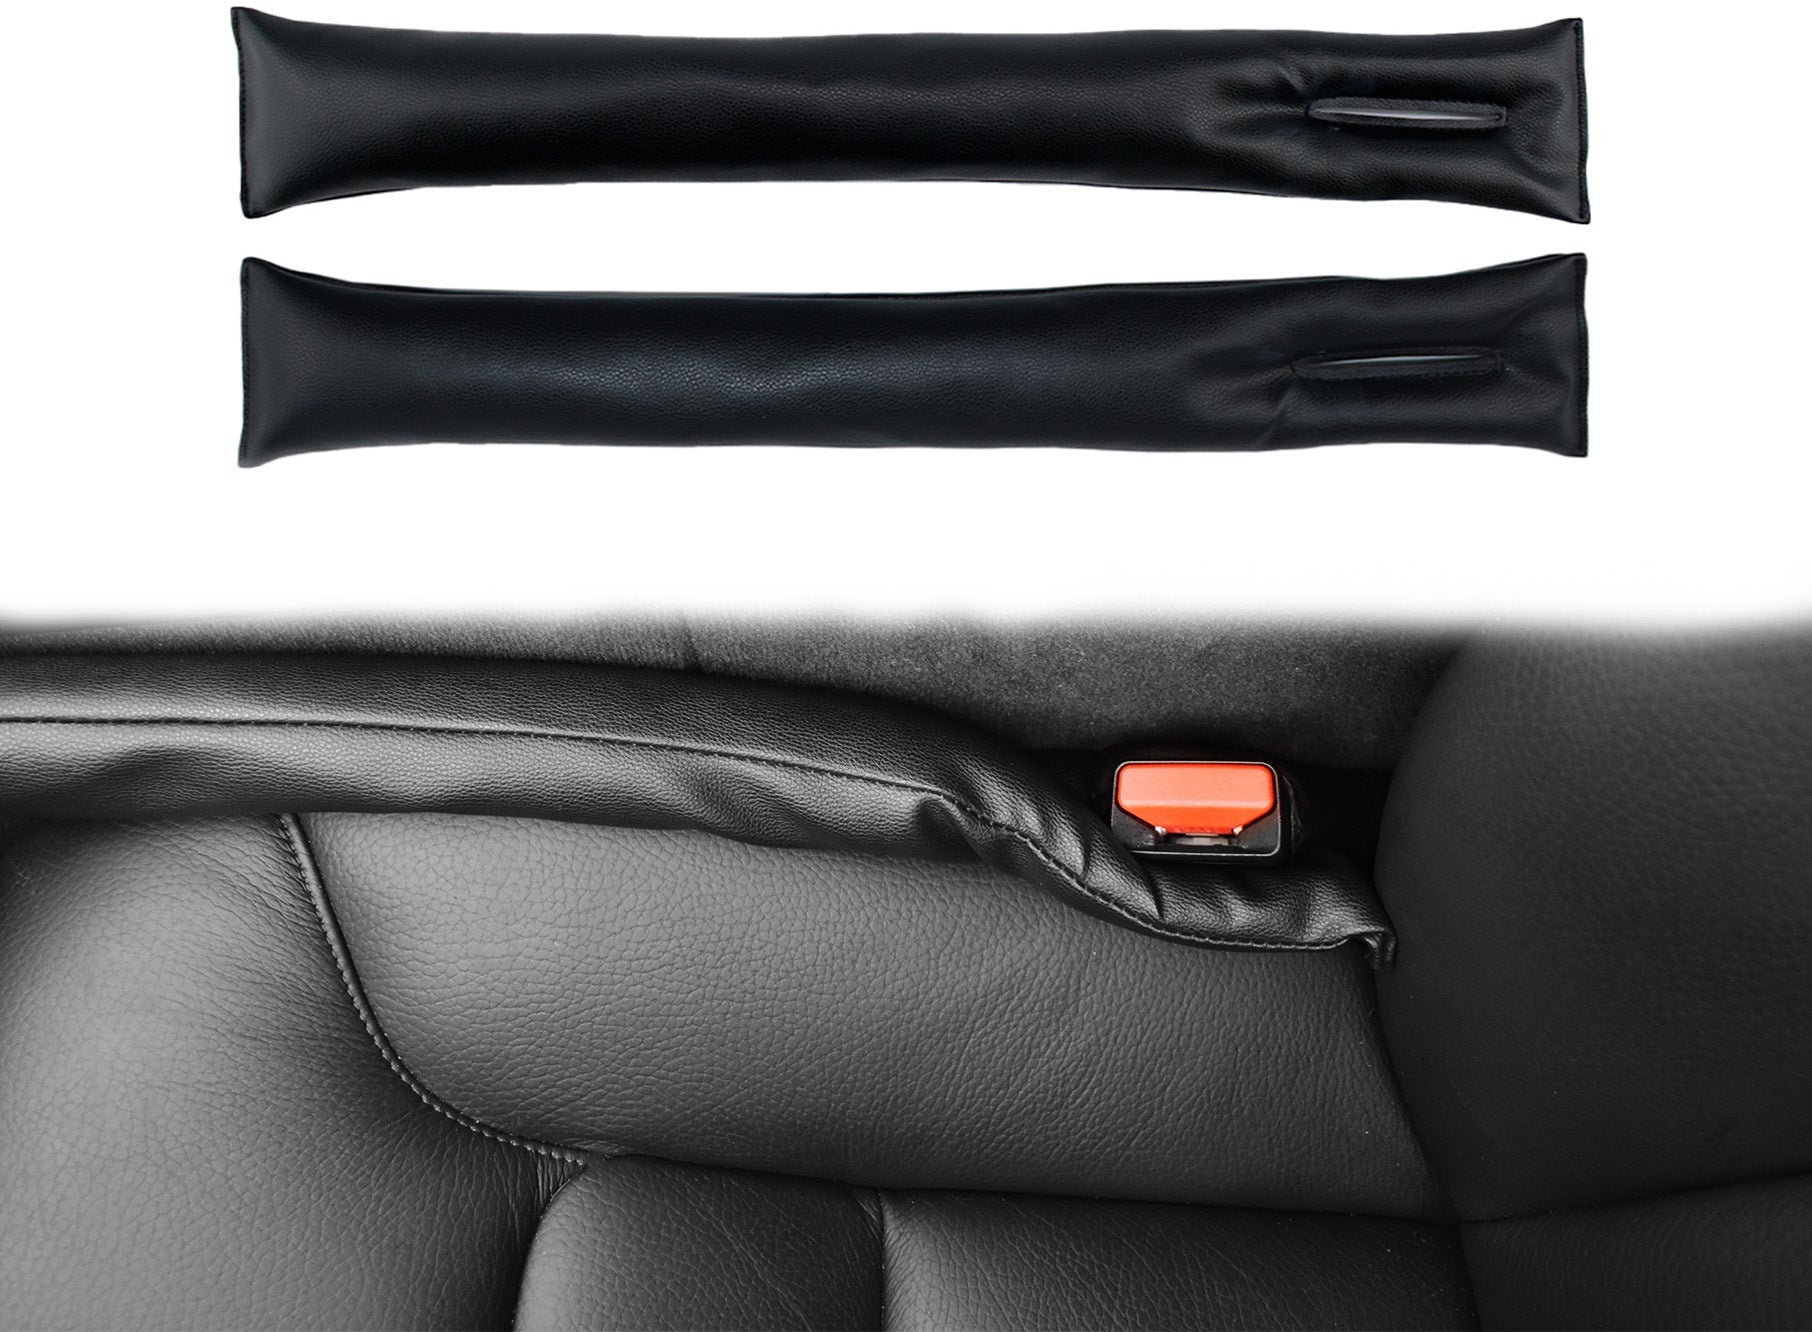 Leather Car Seat Gap Filler Universal Fit Organizer Stop Things from  Dropping, Black, 2 Pack 